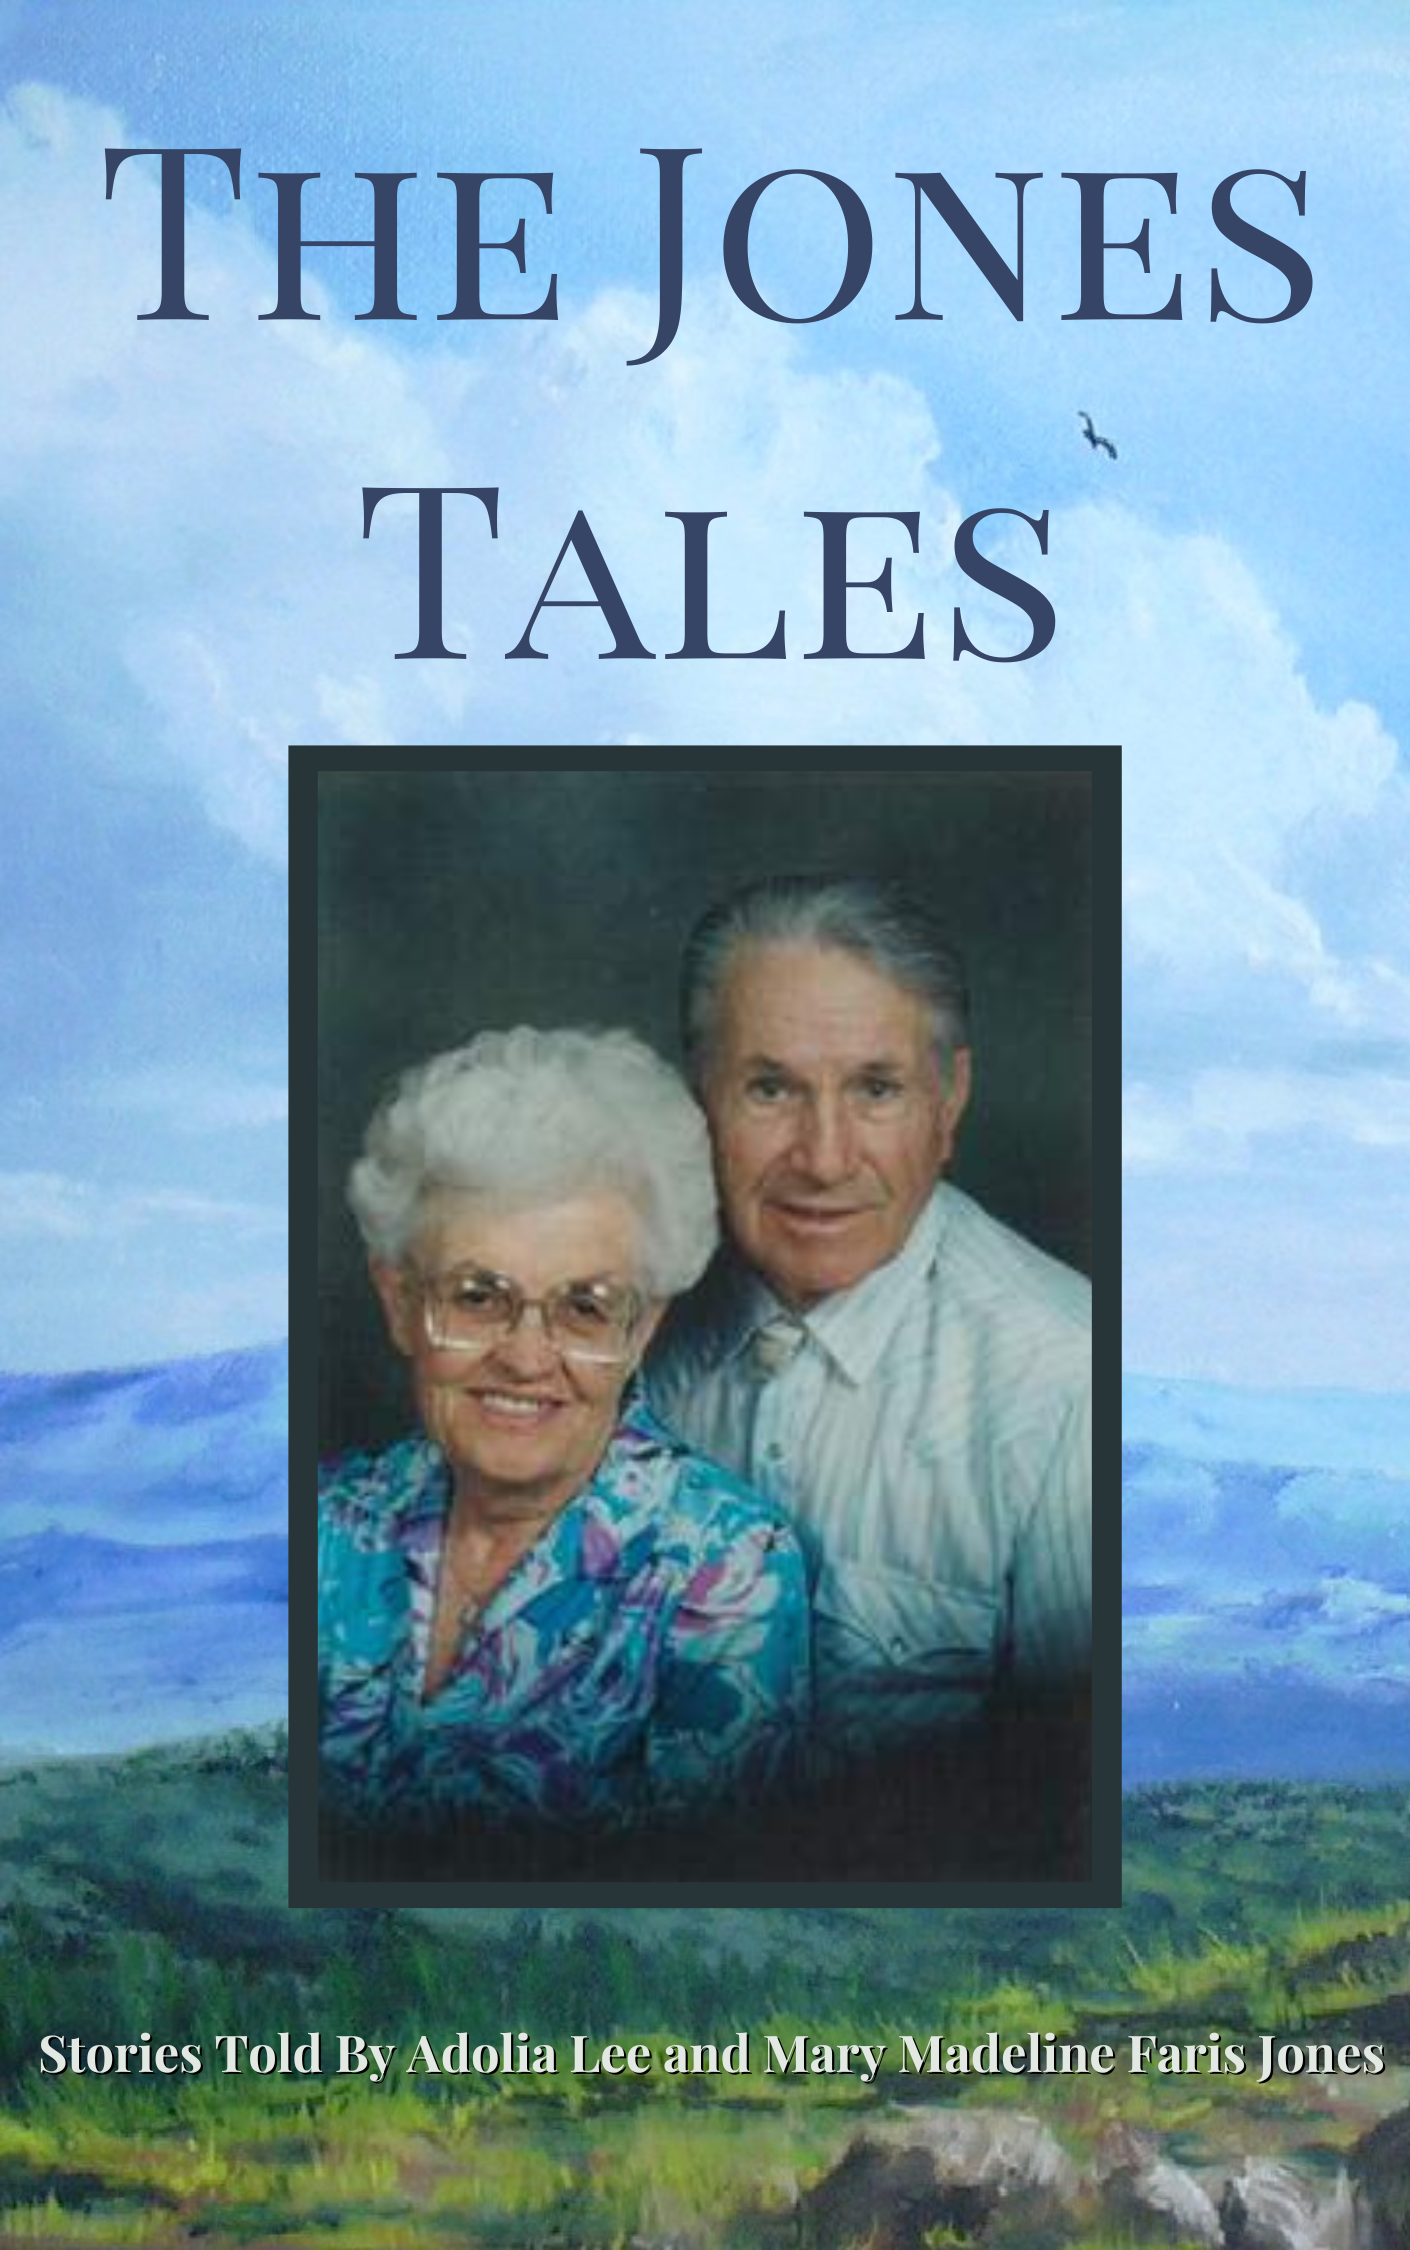 The Jones Tales 

I conducted a series of interviews with Adolia and Mary Jones about their lives and recorded their answers on a cassette tape. I transcribed the recordings, organized their stories, and edited them to create The Jones Tales. This was a labor of love as Adolia and Mary are my maternal grandparents. I provided them with a copy of their stories so that they could review them. I then made their requested changes updating their stories. Their stories were organized into a book that was presented to their descendants at a family reunion in 2013.